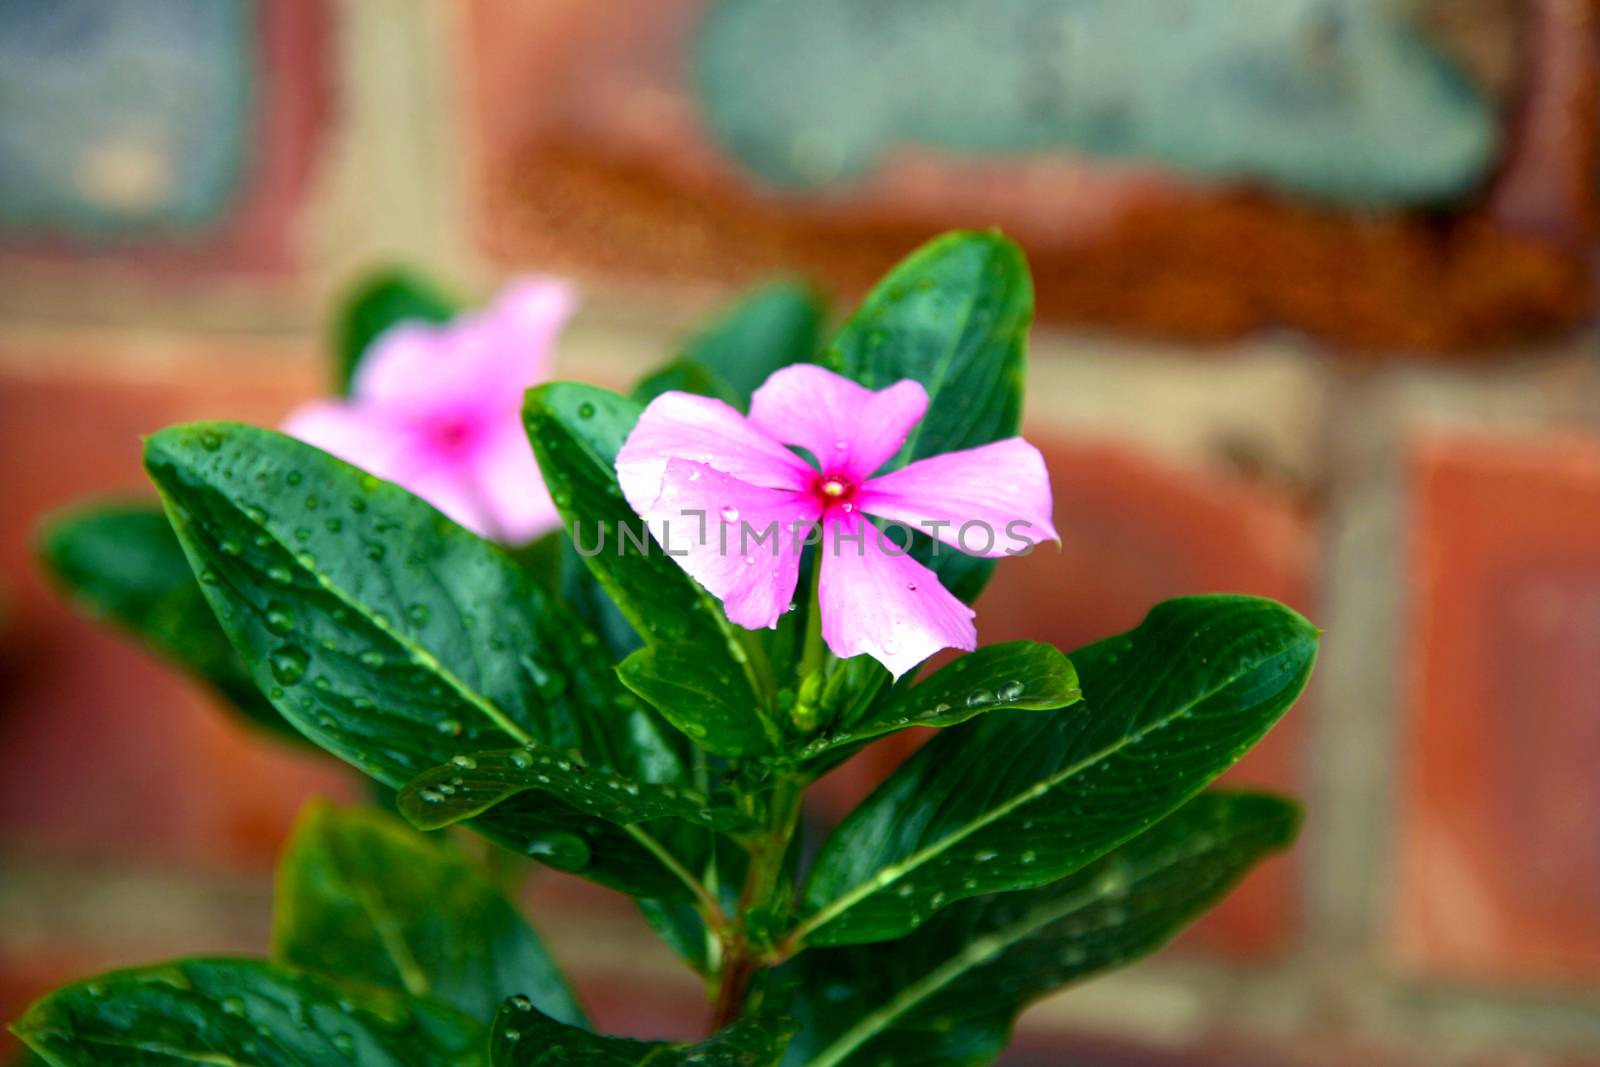 small pink flower up close with water droplets on its green leaves in front of a red facebrick wall